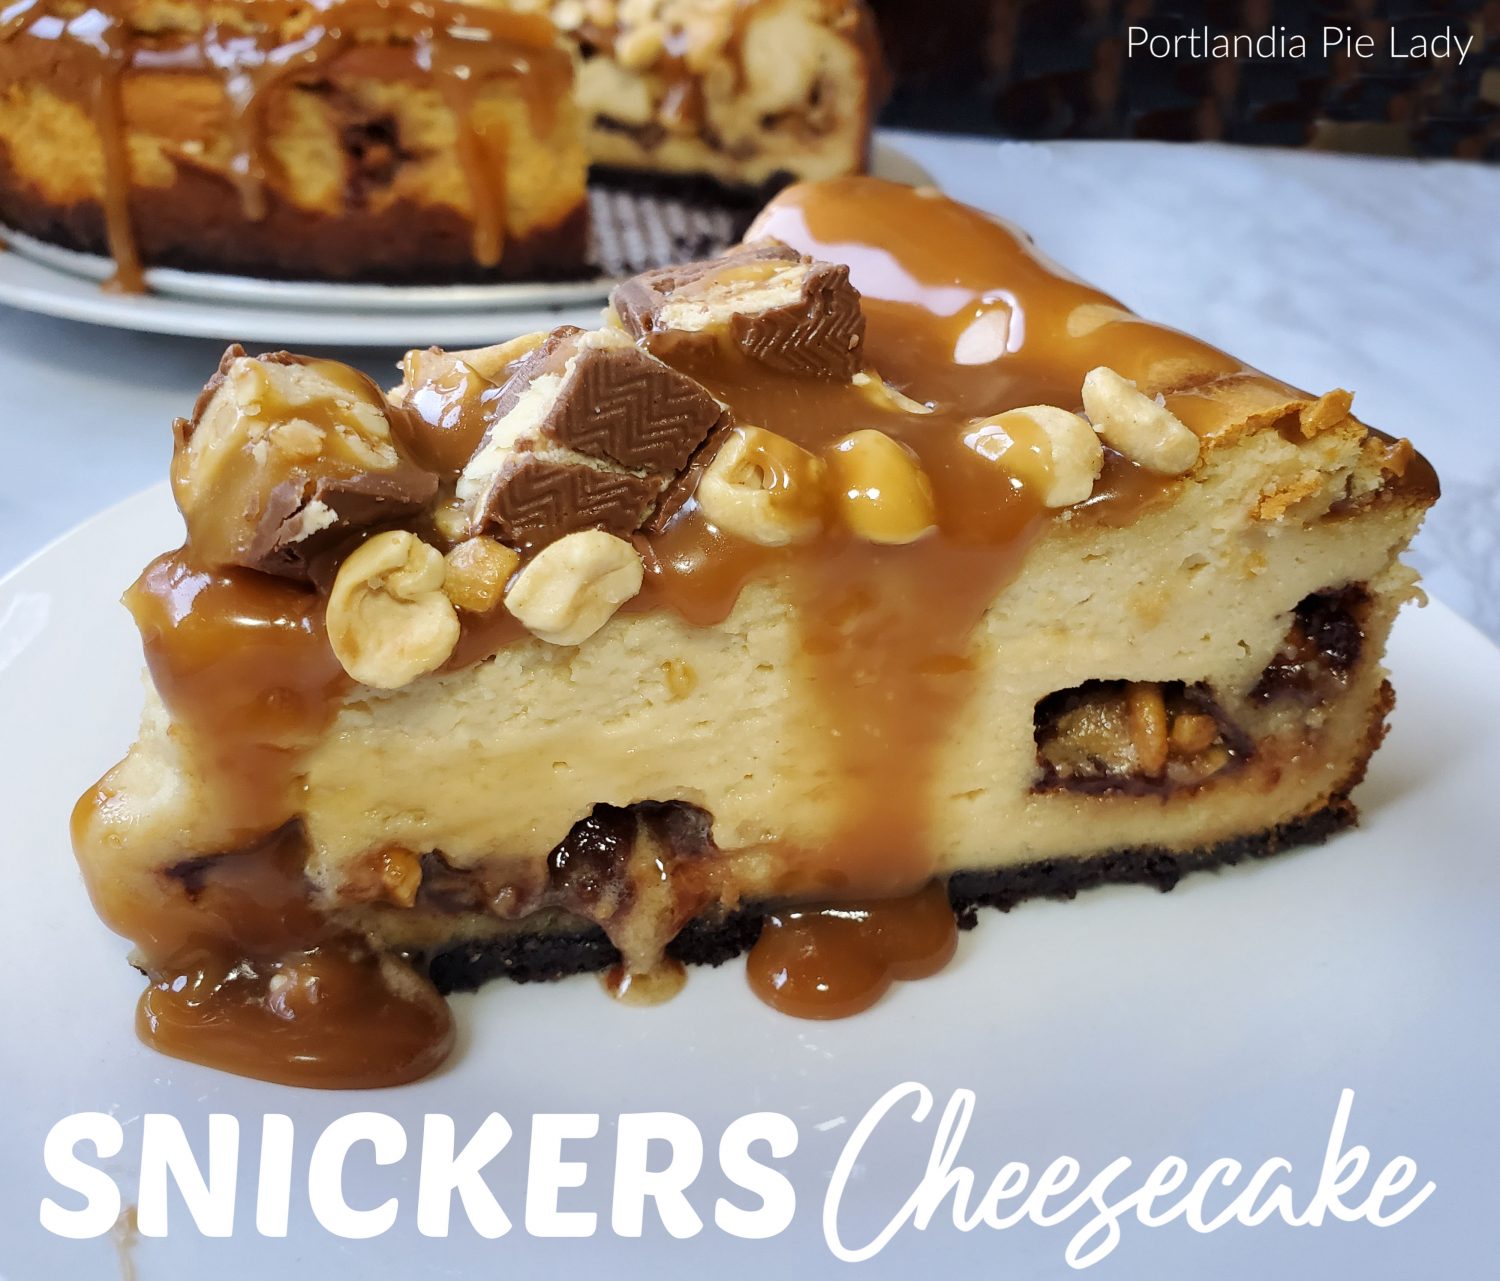 Snickers Cheescake, peanuty flavored filling loaded with Snickers and topped off with salted caramel sauce and roasted peanuts.  Dessert is great tonight!